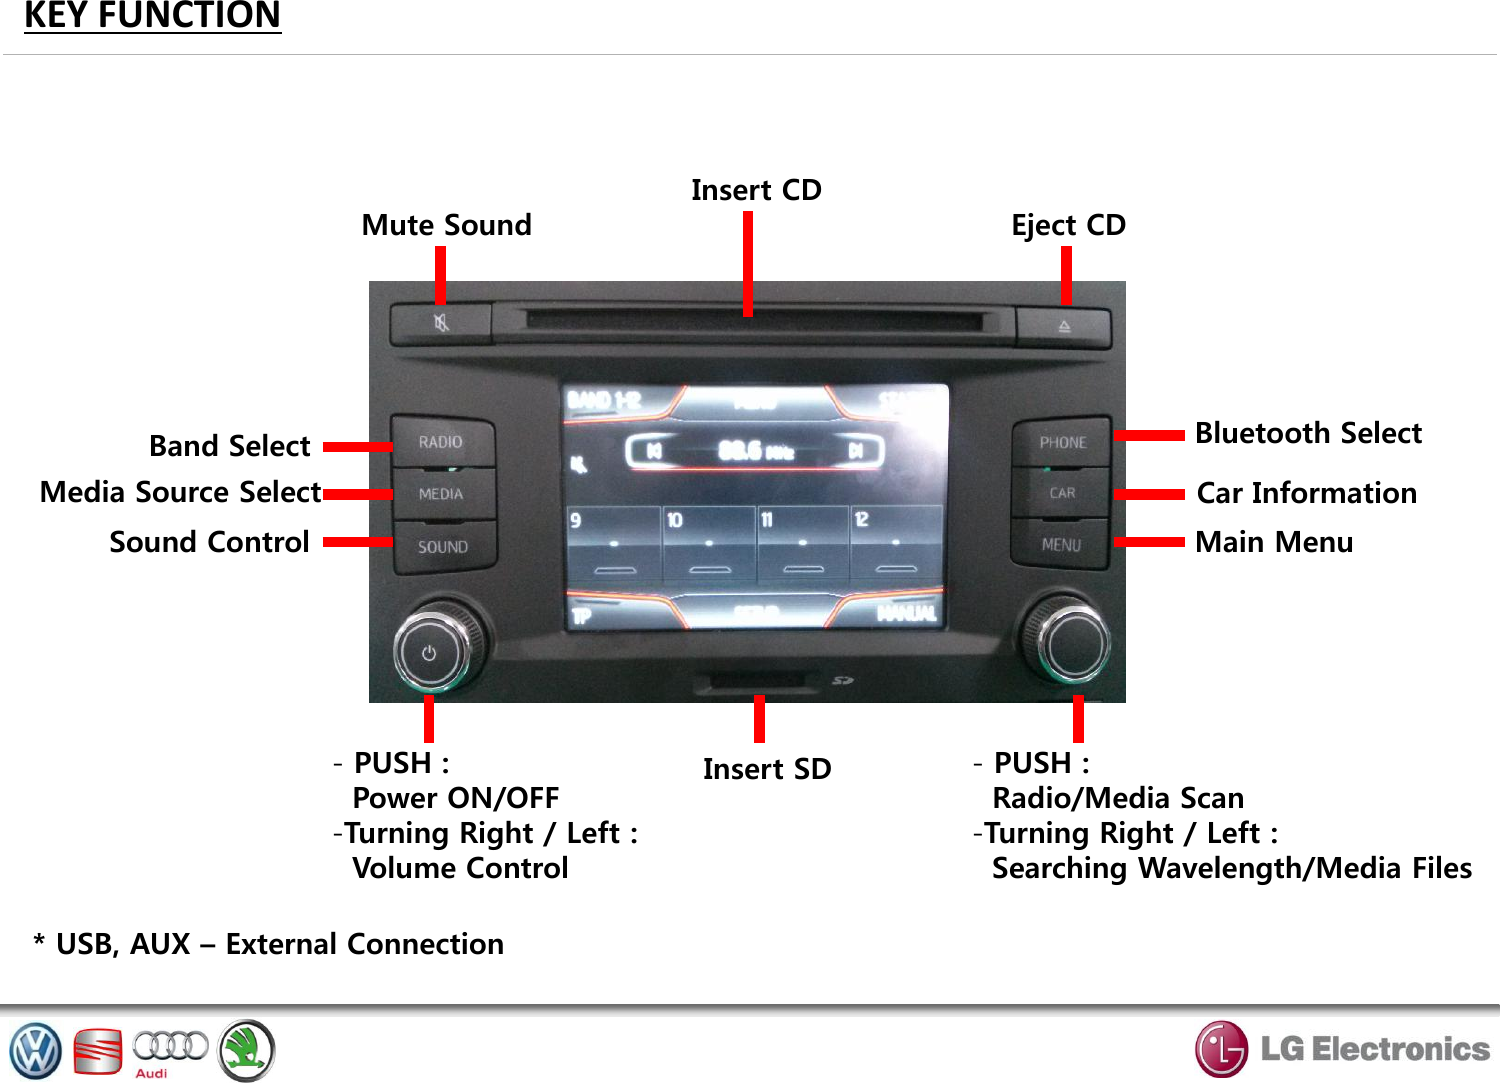 KEY FUNCTION Mute Sound  Eject CD Insert CD Insert SD Band Select Media Source Select Sound Control - PUSH :   Power ON/OFF -Turning Right / Left :          Volume Control Bluetooth Select Main Menu Car Information - PUSH :    Radio/Media Scan -Turning Right / Left :        Searching Wavelength/Media Files  * USB, AUX – External Connection  